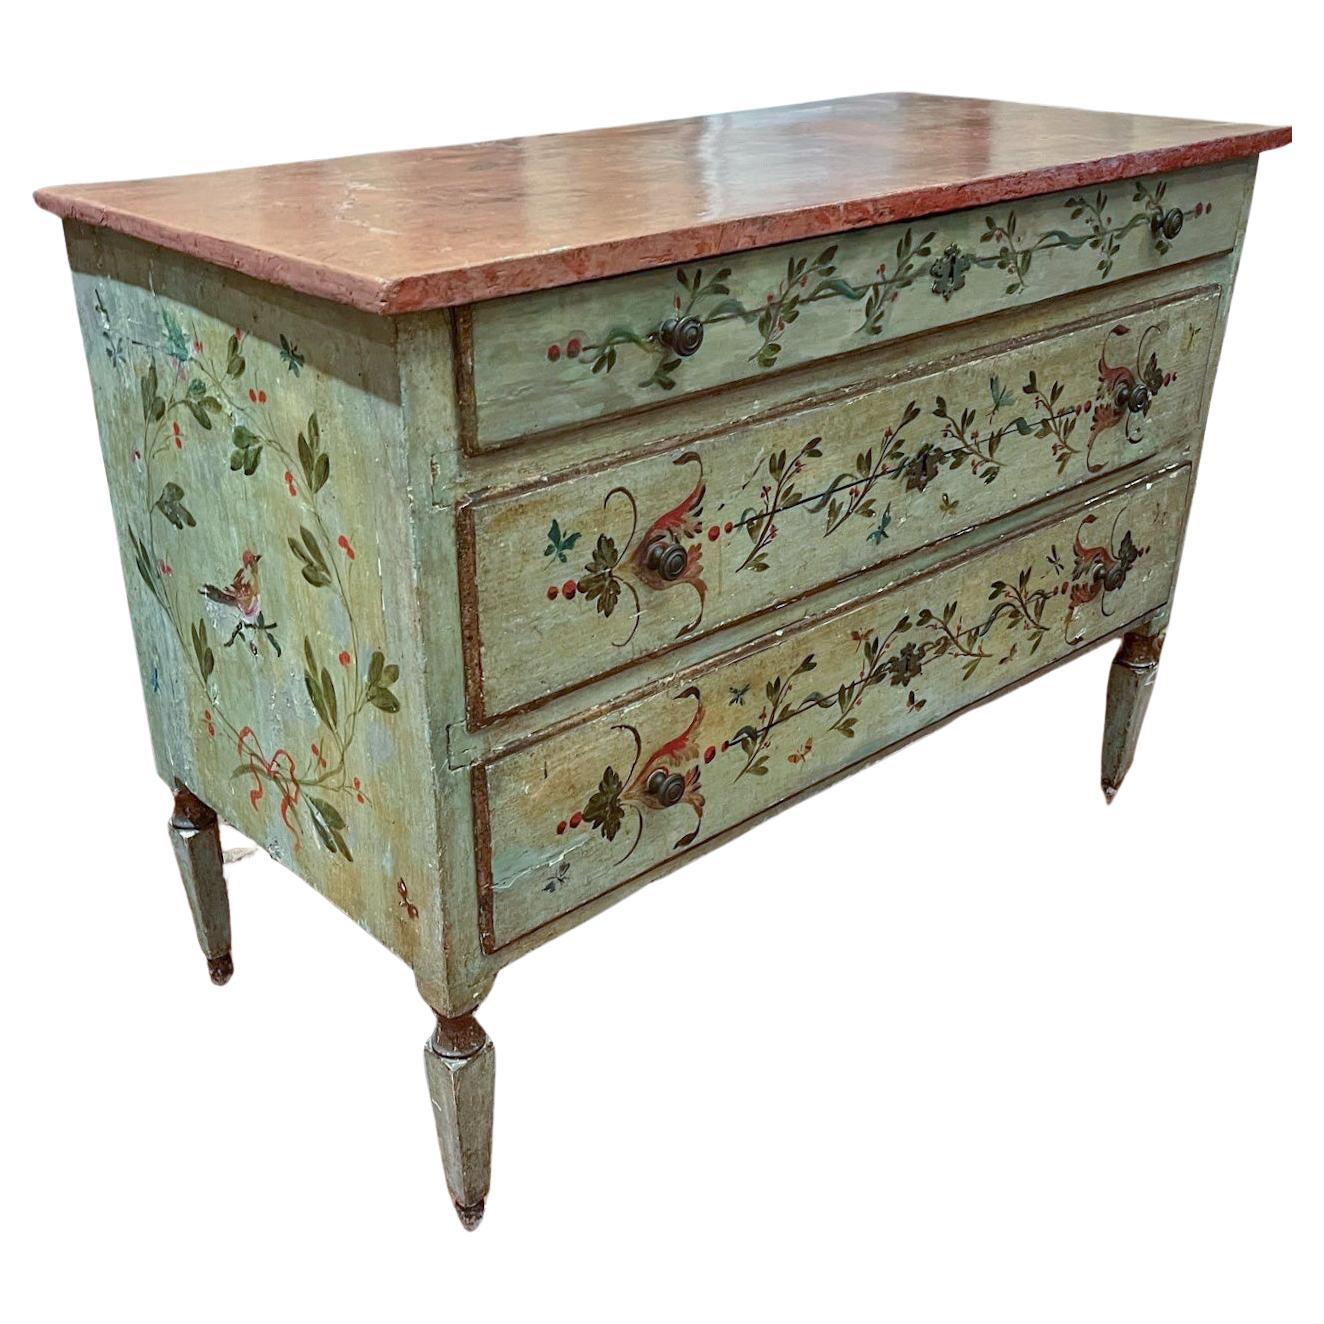 18th Century Polychrome Painted Faux Marble Top Neoclassical Chest of Drawers. For Sale